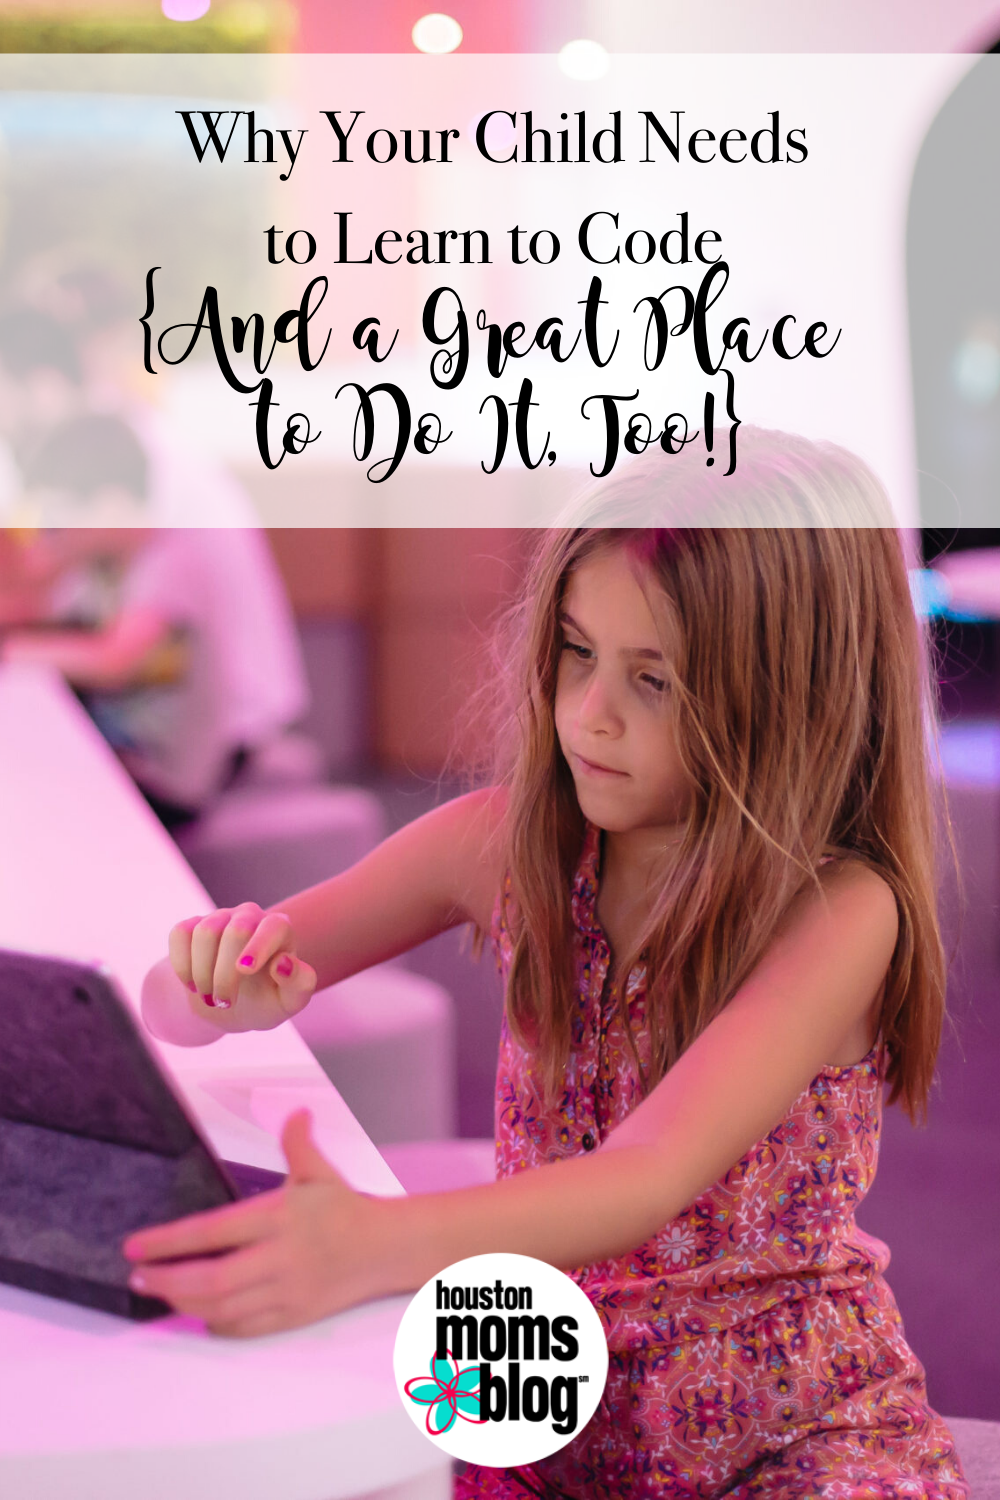 Houston Moms Blog "Why Your Child Needs to Learn to Code {And a Great Place to Do it Too!} #houstonmomsblog #momsaroundhouston